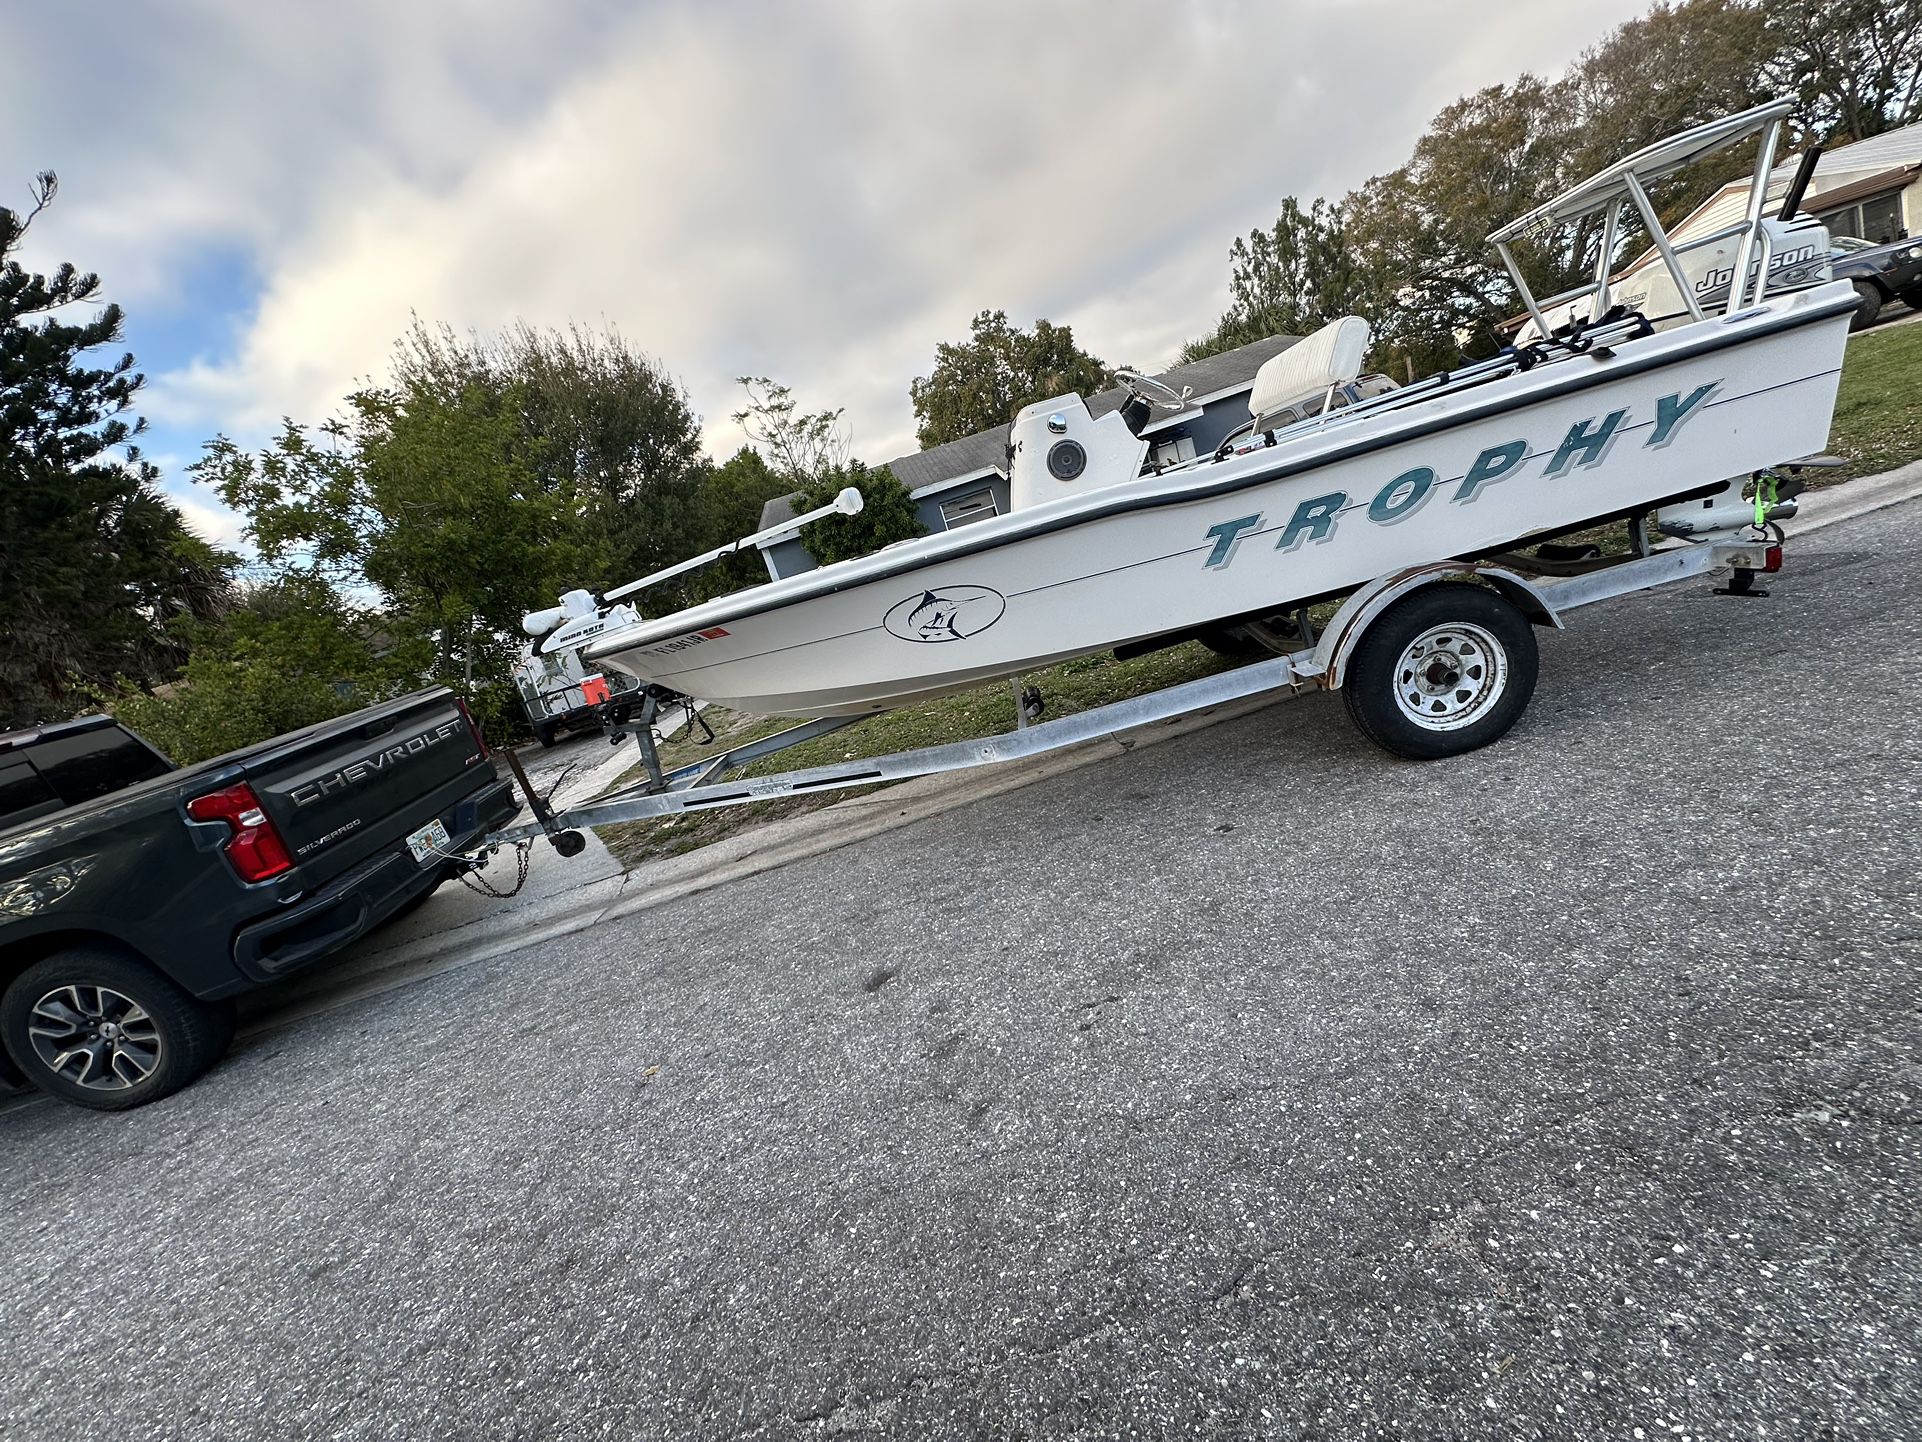 Bayliner Trophy 97 With a 2000 90 Horse Johnson 2 Stroke 